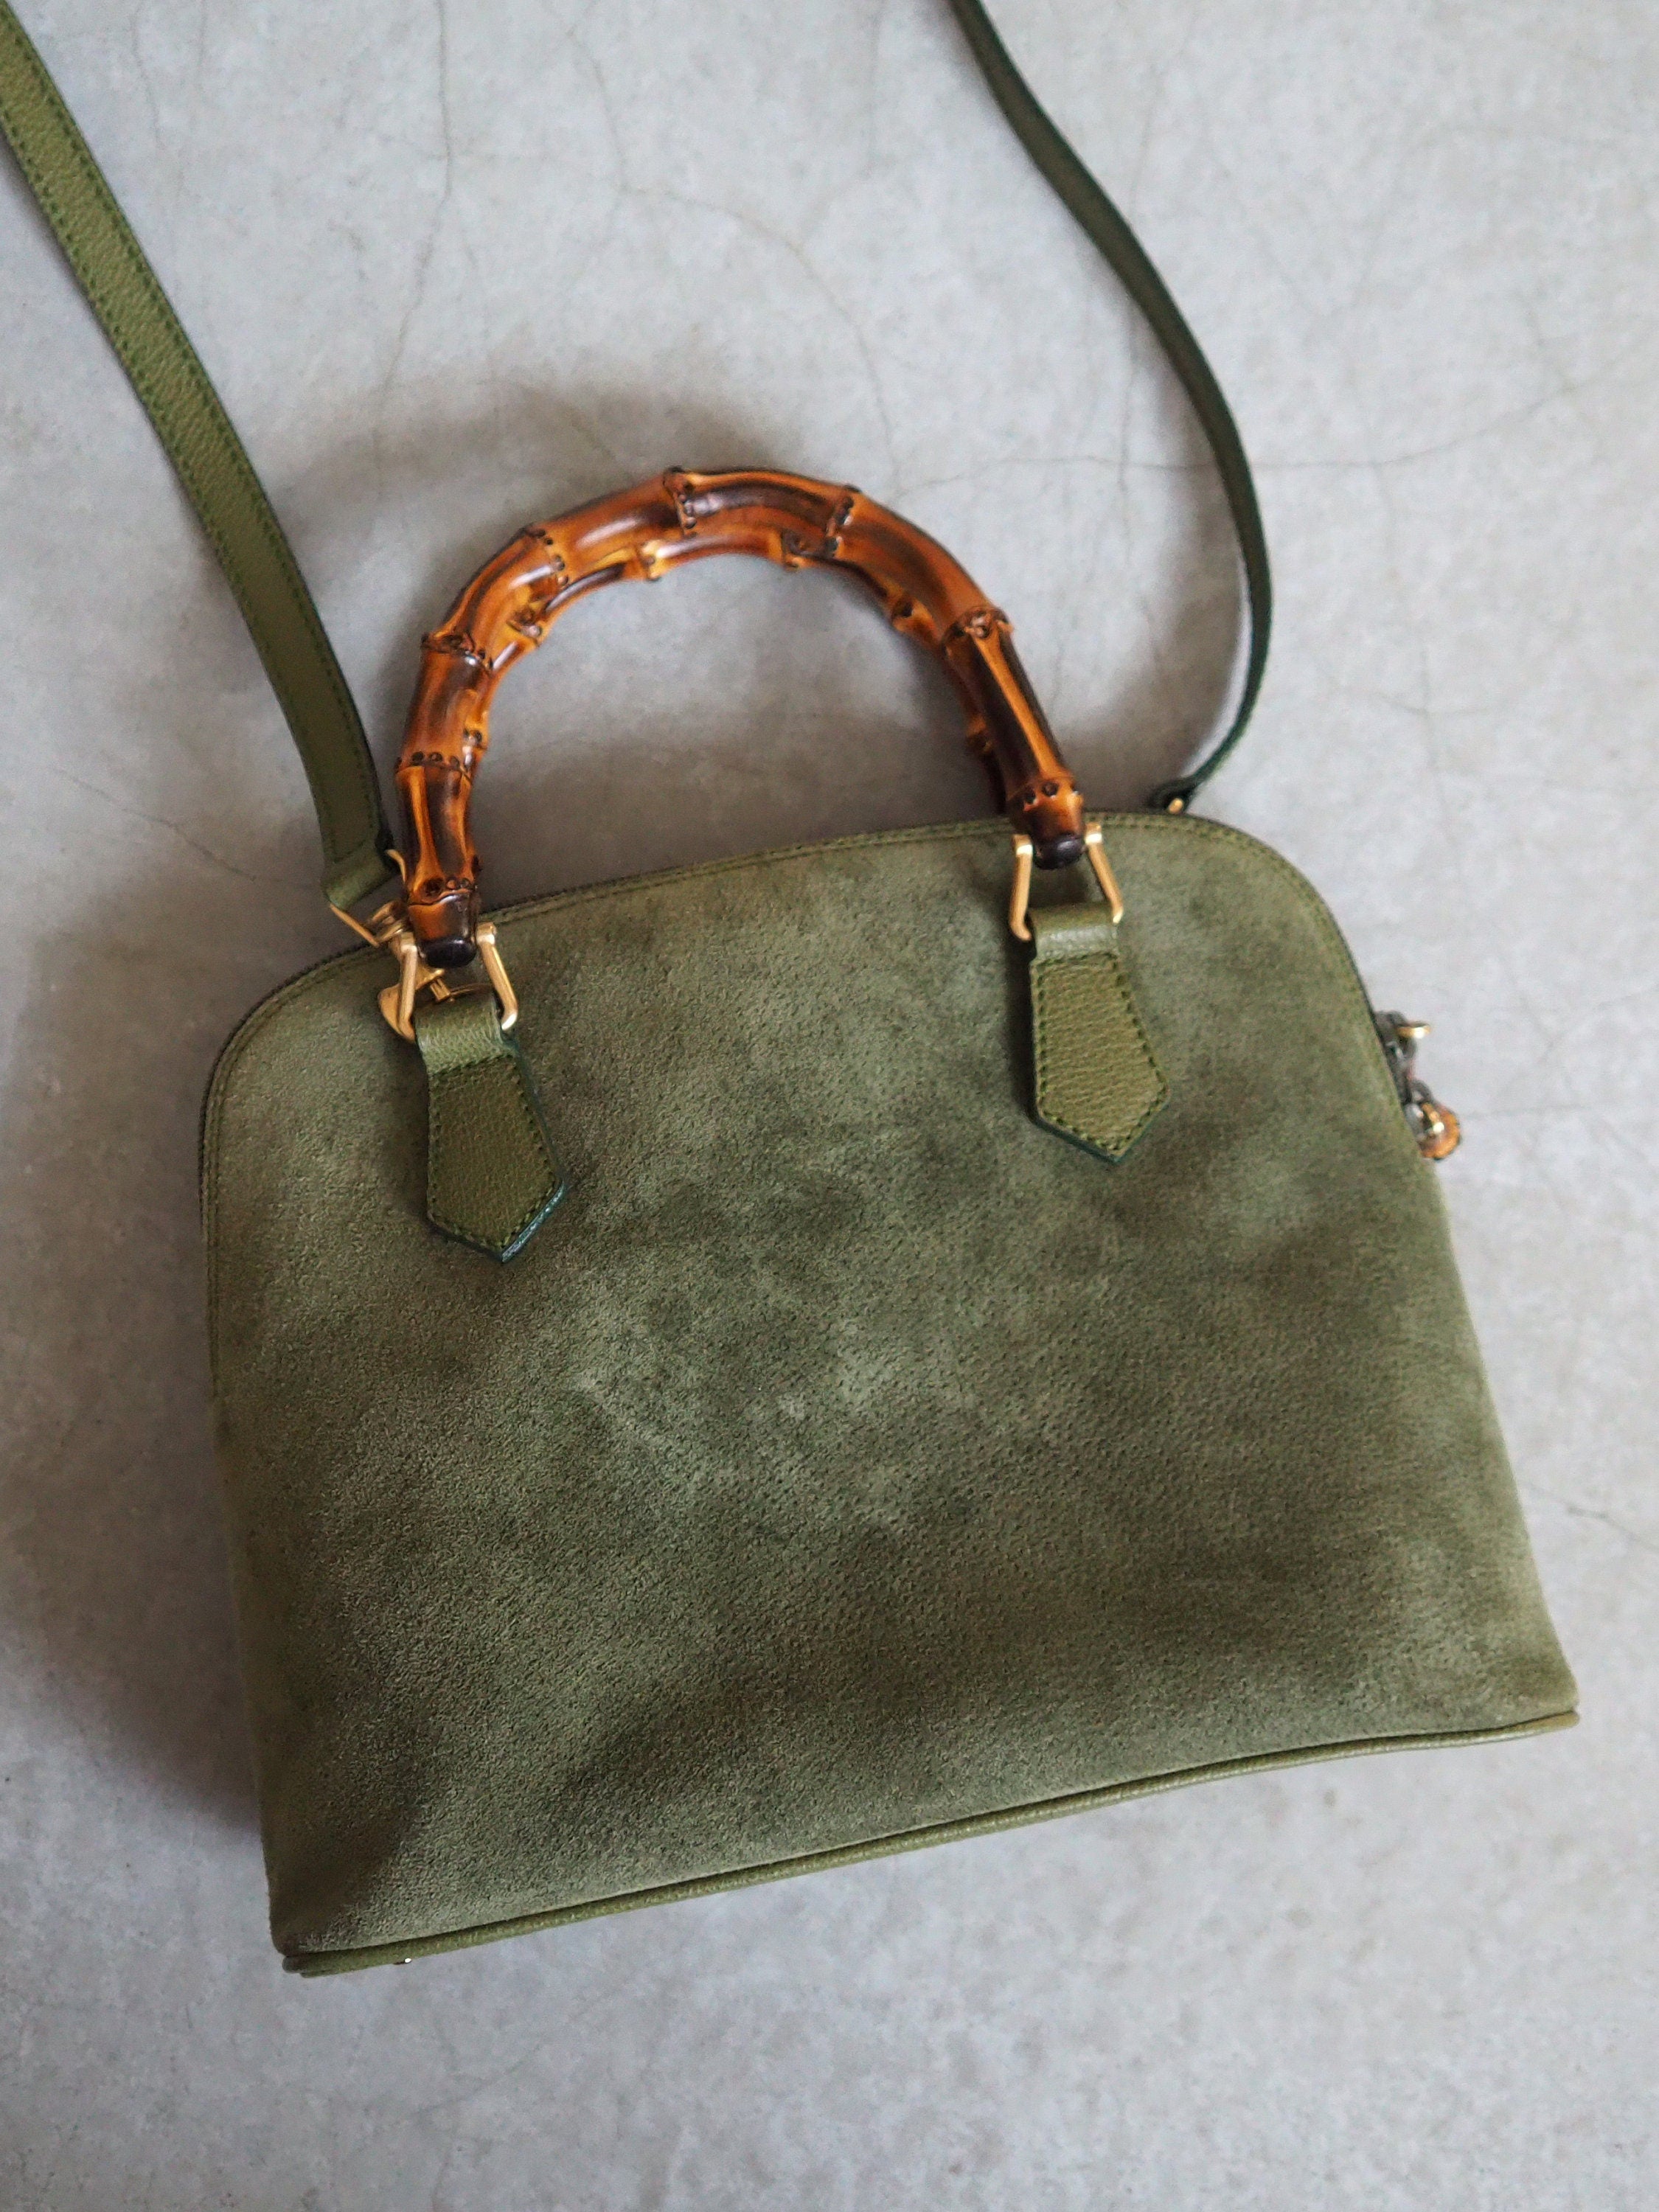 GUCCI Bamboo Hand Shoulder 2way Bag Suede Green Vintage Authentic